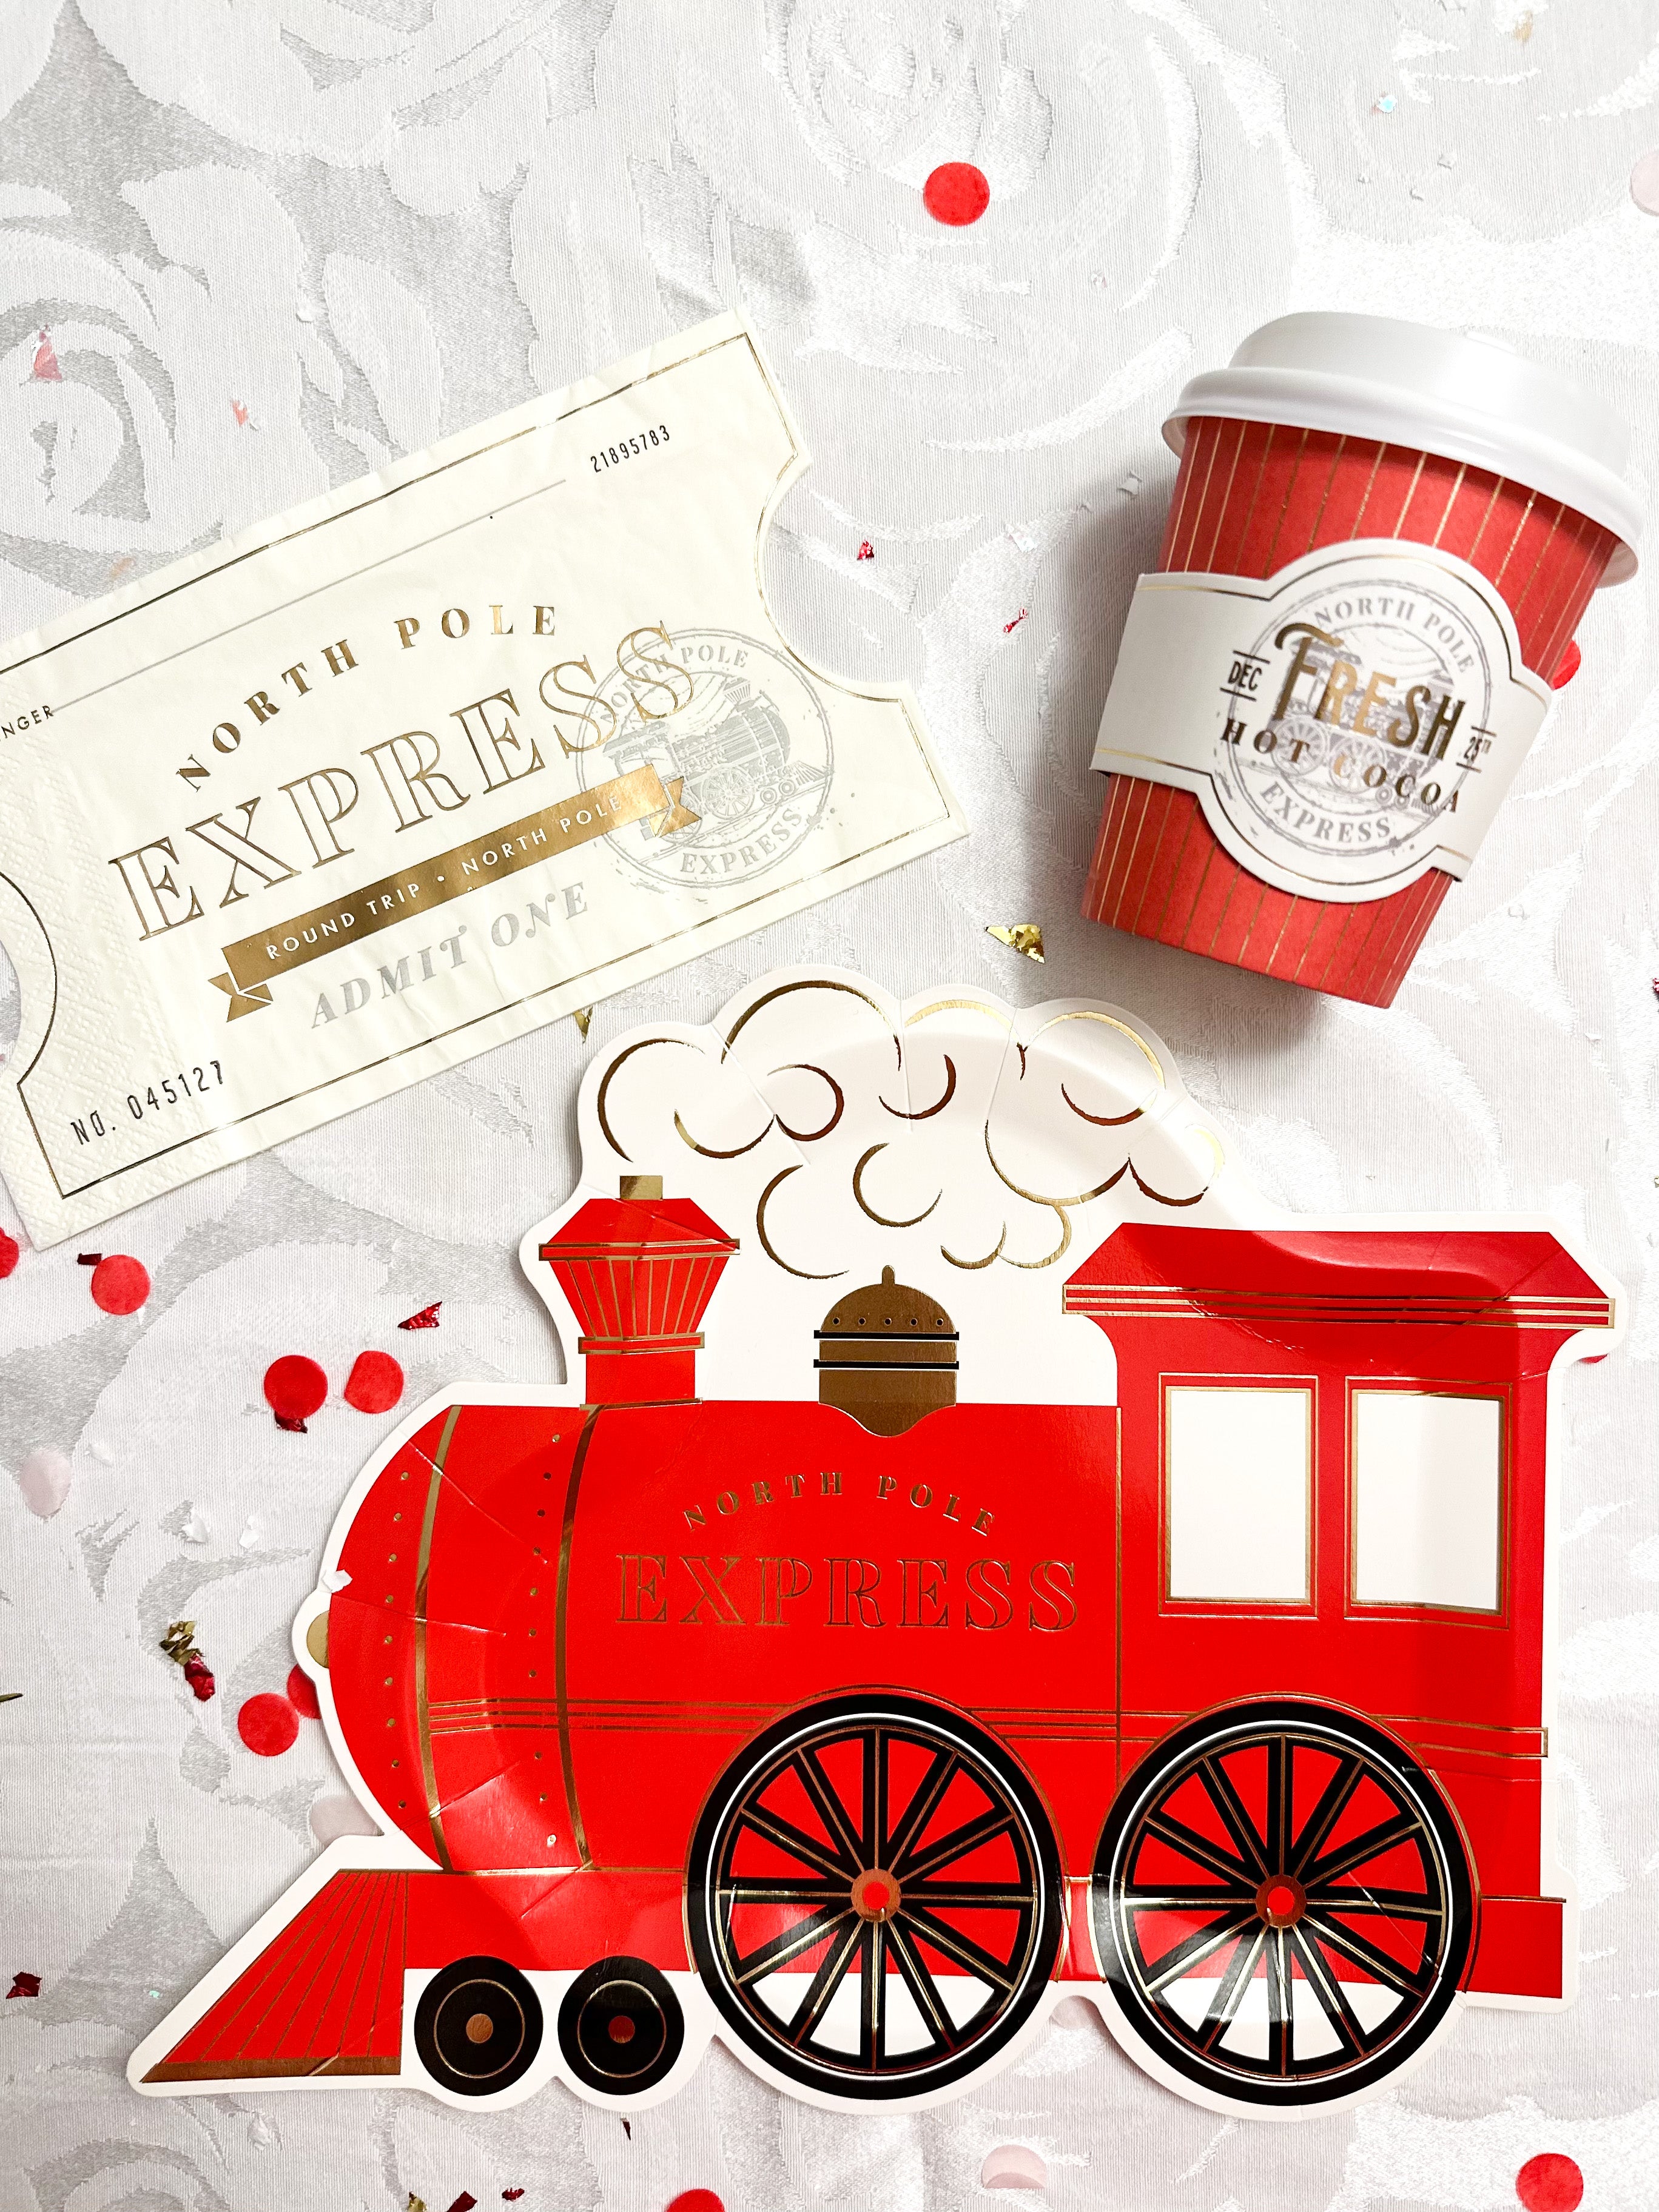 NORTH POLE EXPRESS TO GO CUP